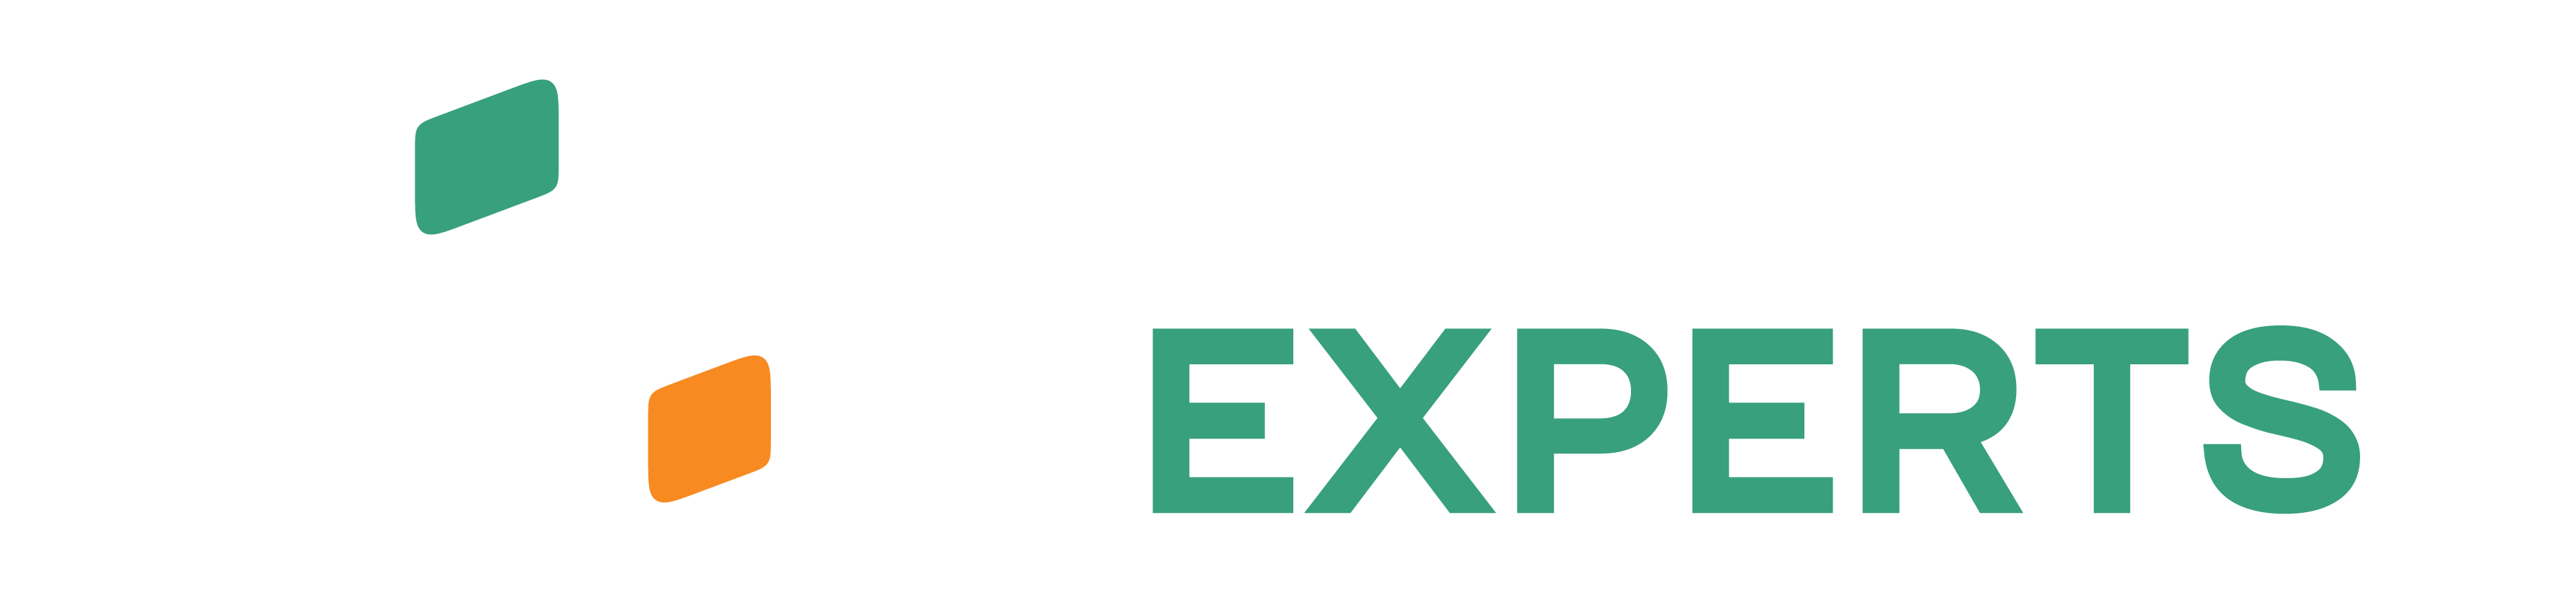 Augmented Experts